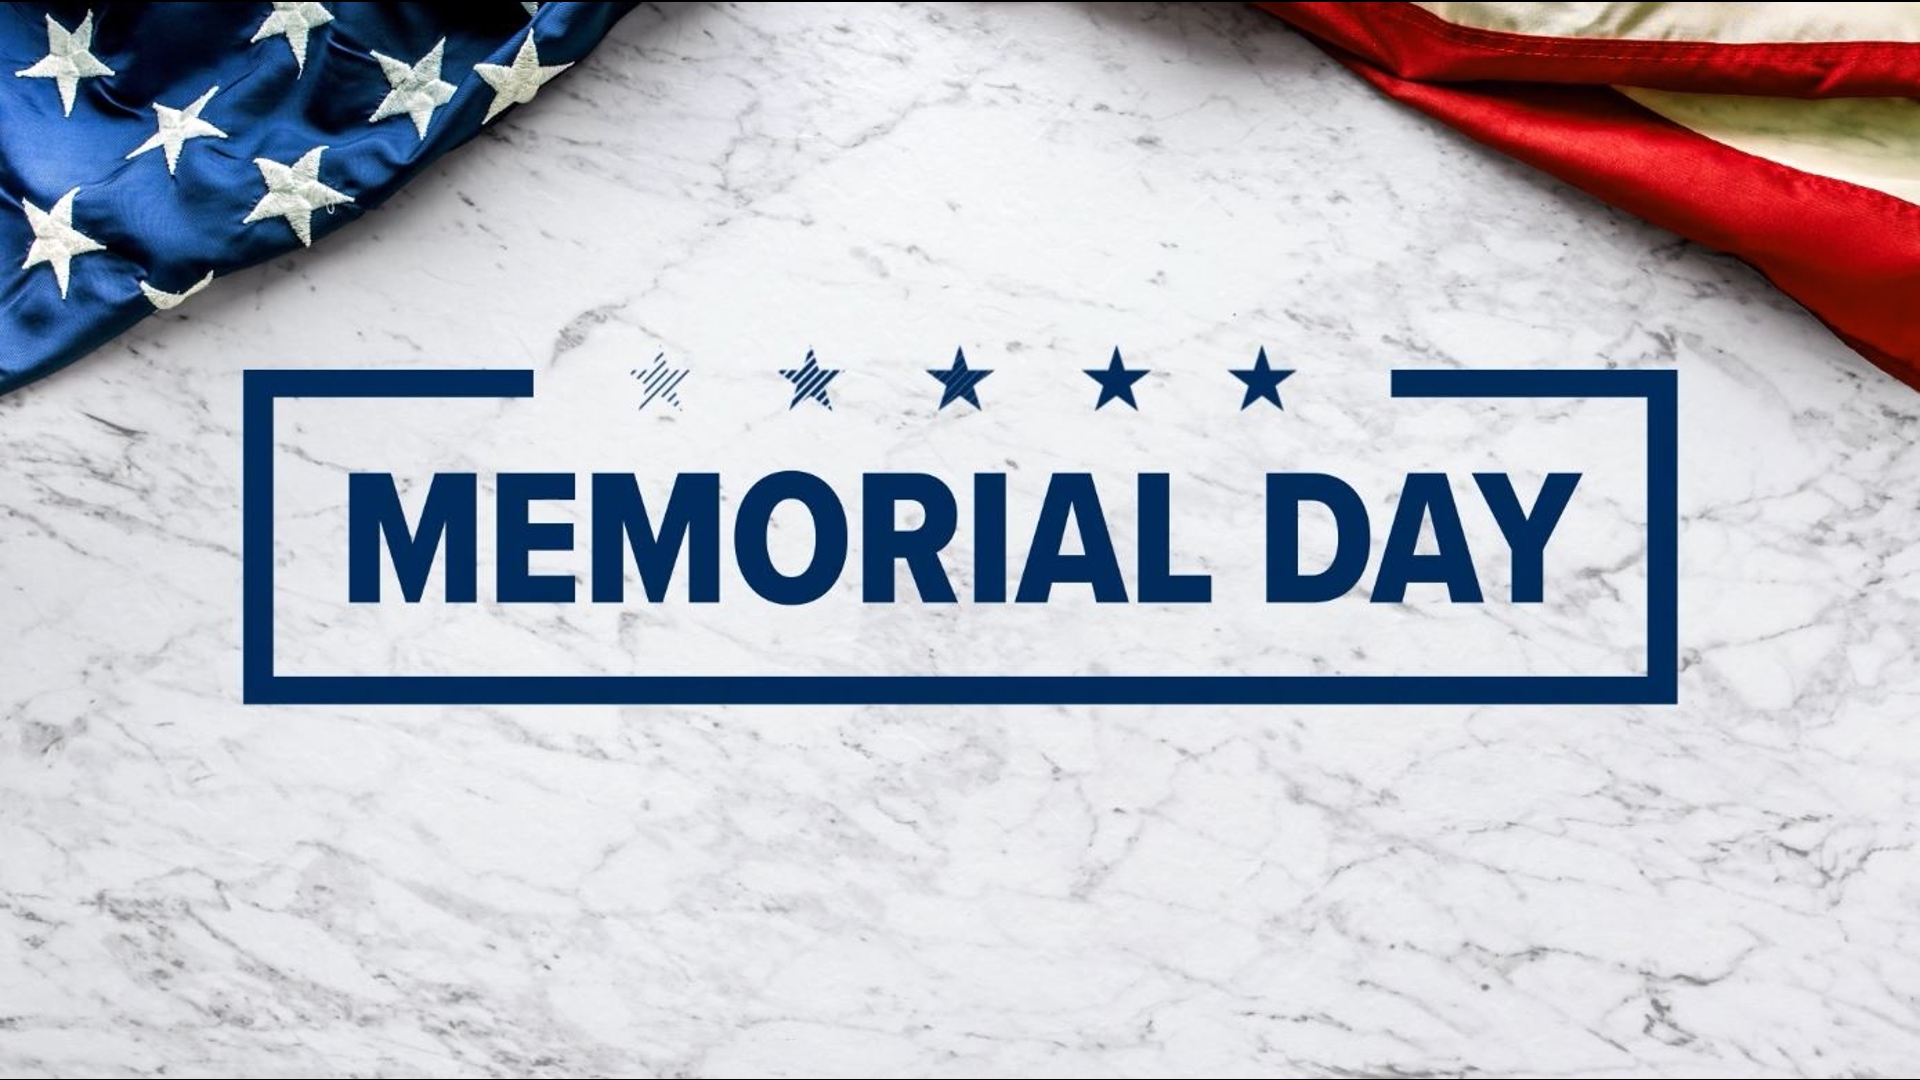 Memorial day is a time to honor the U.S. service members who paid the ultimate sacrifice. A look at the importance of the day and the organization raising awareness.